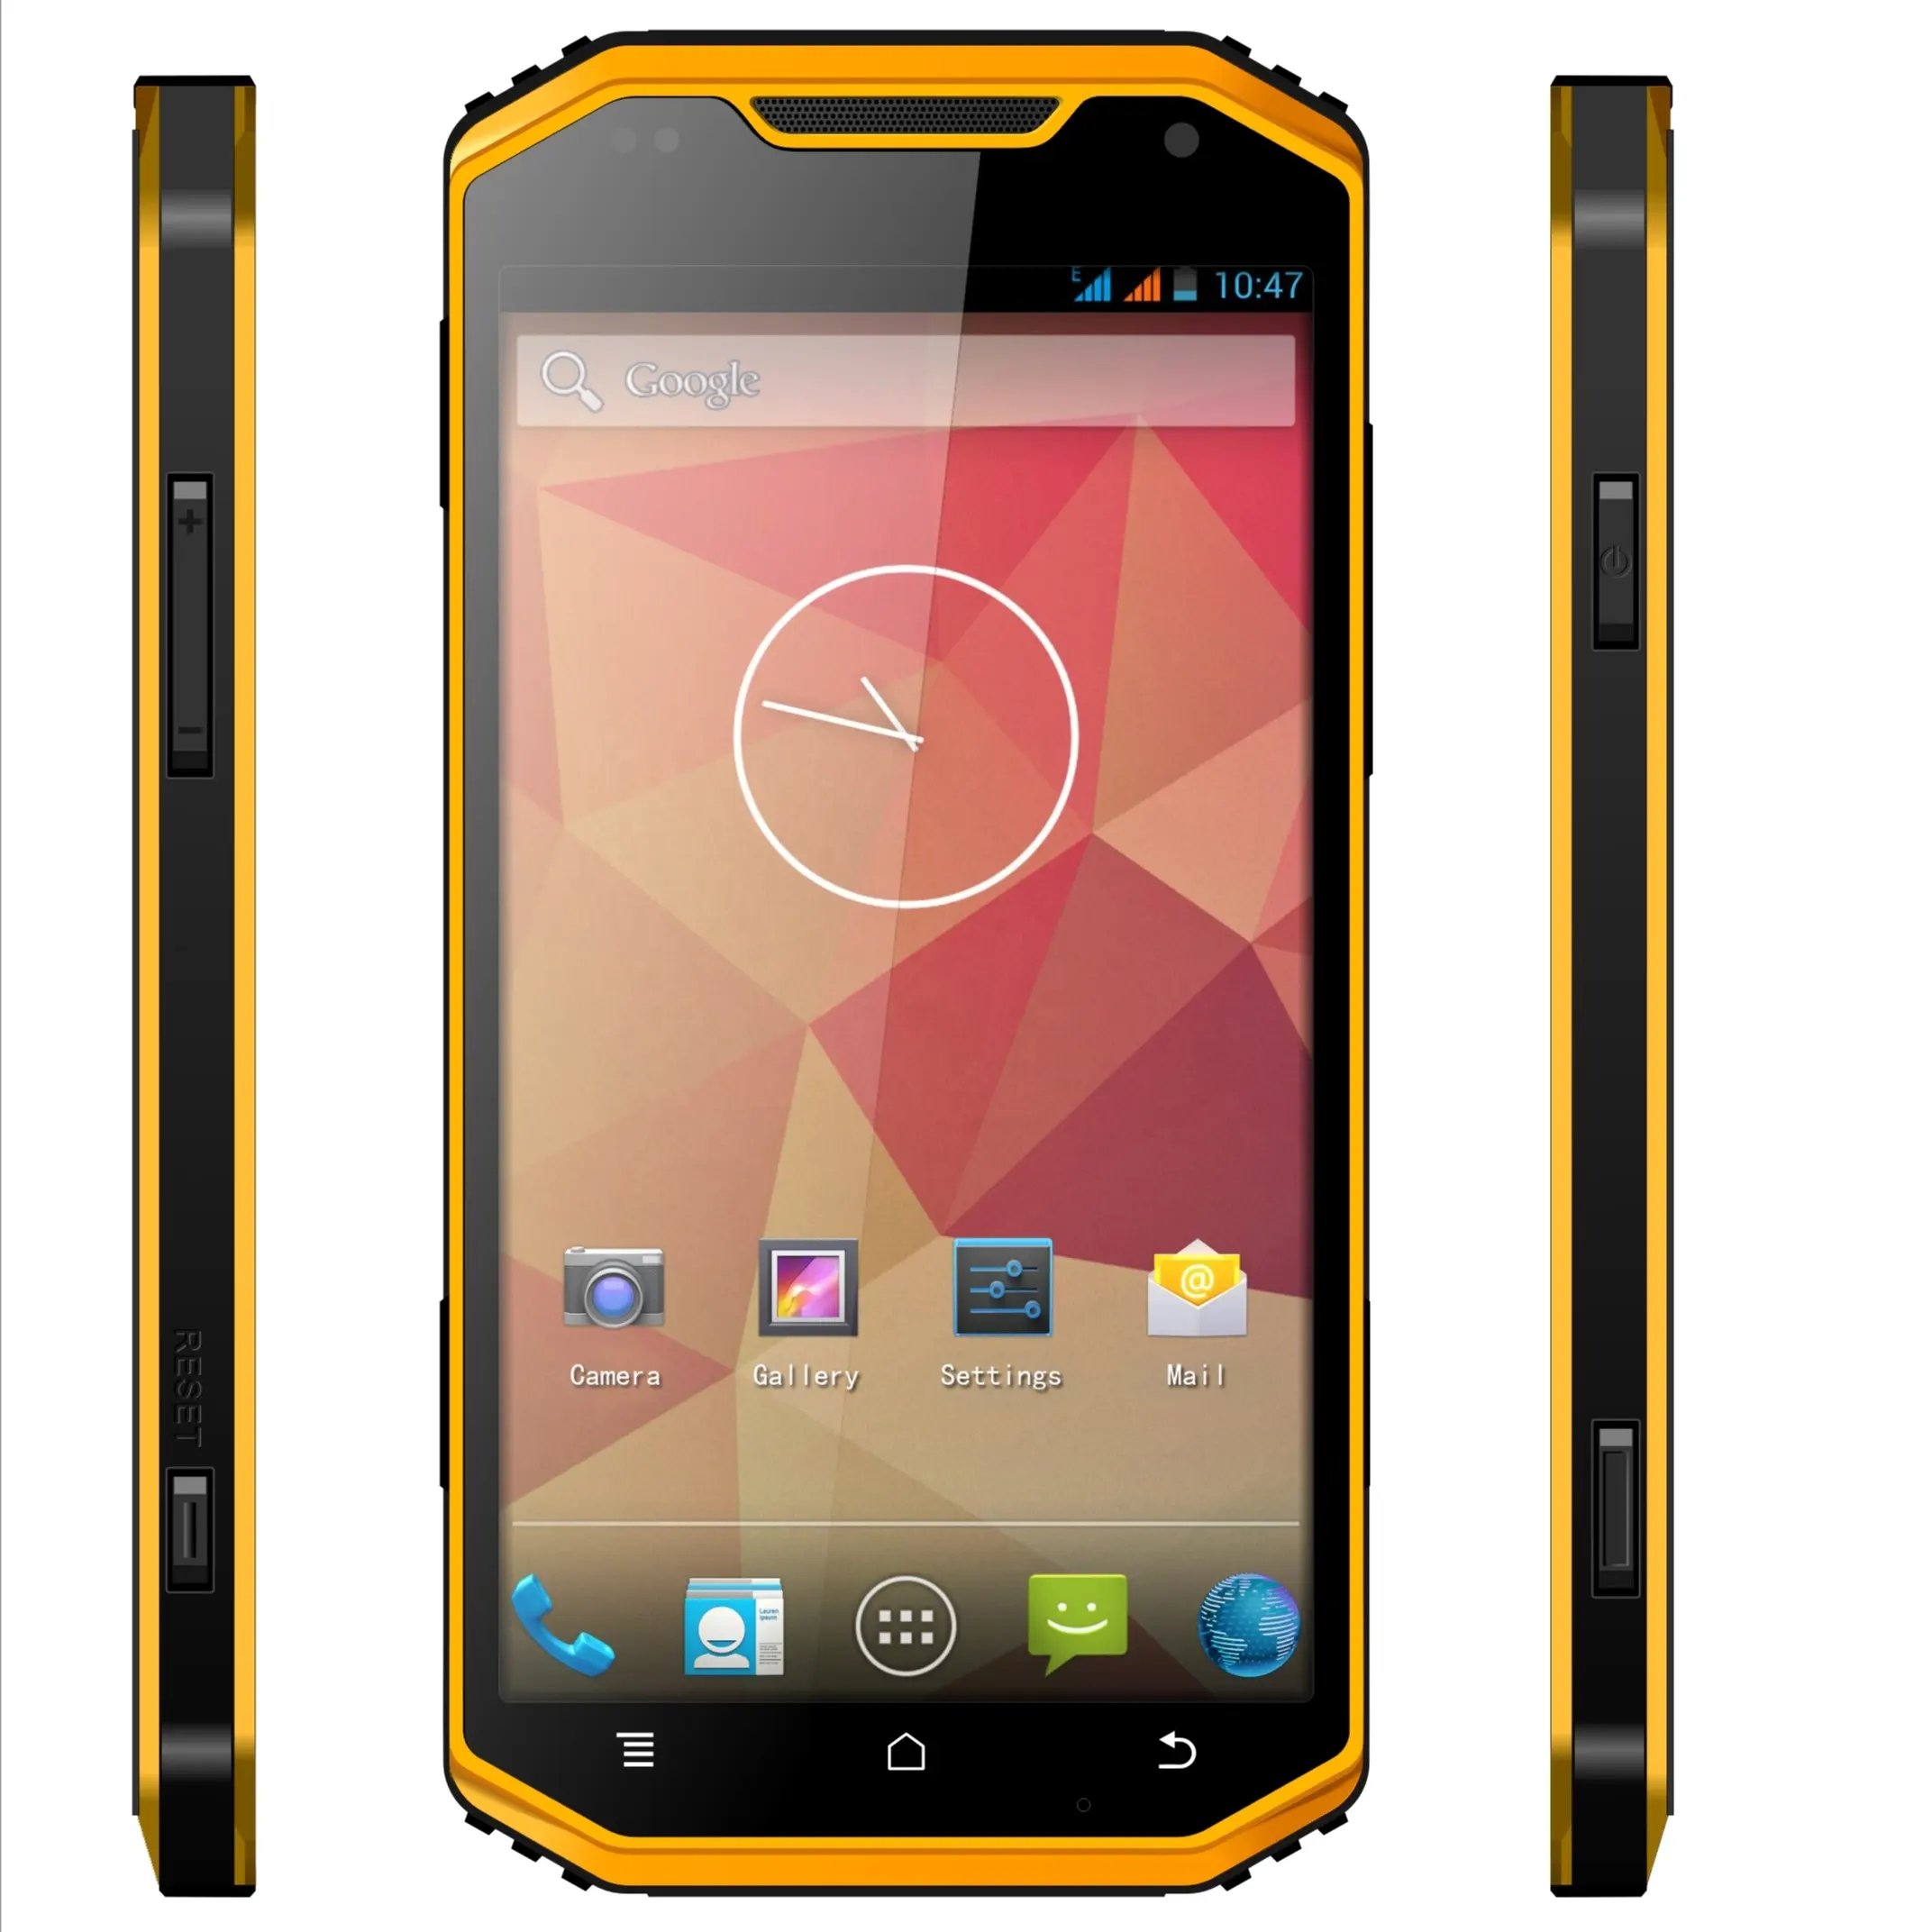 H20 Tauch Android 4,2 Quad core IP68 Grade handy (Saral S-Hinweis)